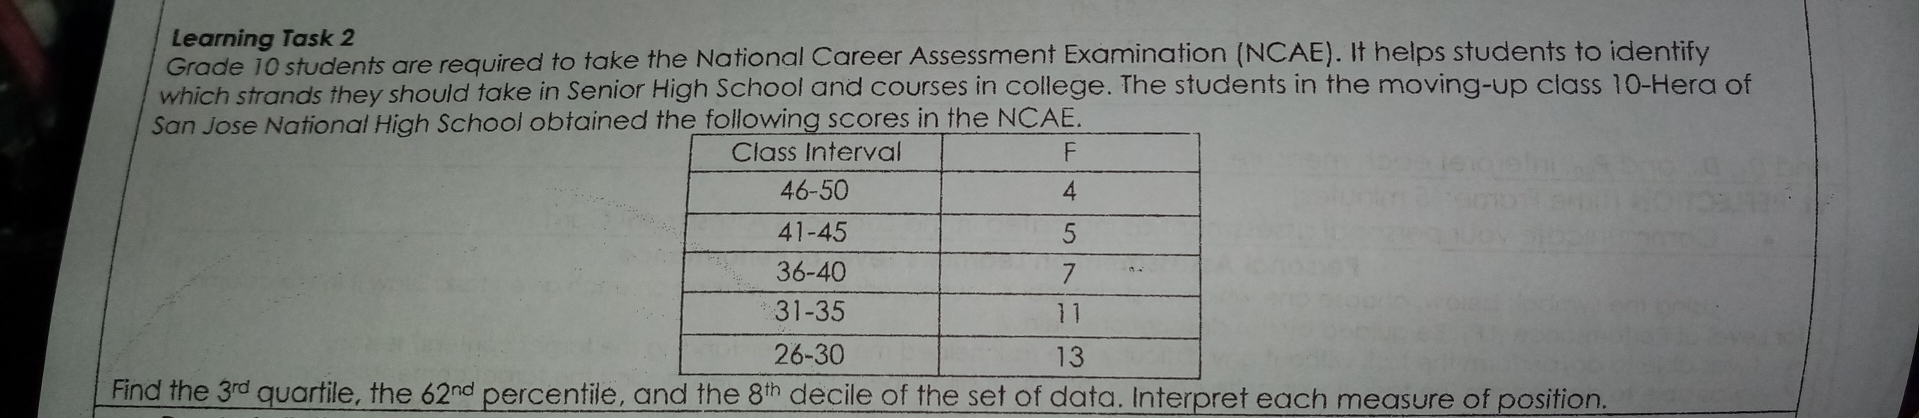 Learning Task 2 Grade 10 students are required to take the National Career Assessment Examination NCAll NCA ° . It helps students to identify which strands they should take in Senior High School and courses in college. The students in the moving-up class 10-Hera of San Jose National High School obtained the following scores in the NCAE. Find the 3rd quartile, the 62nd percentile, and the 8th decile of the set of data. Interpret each measure of position.